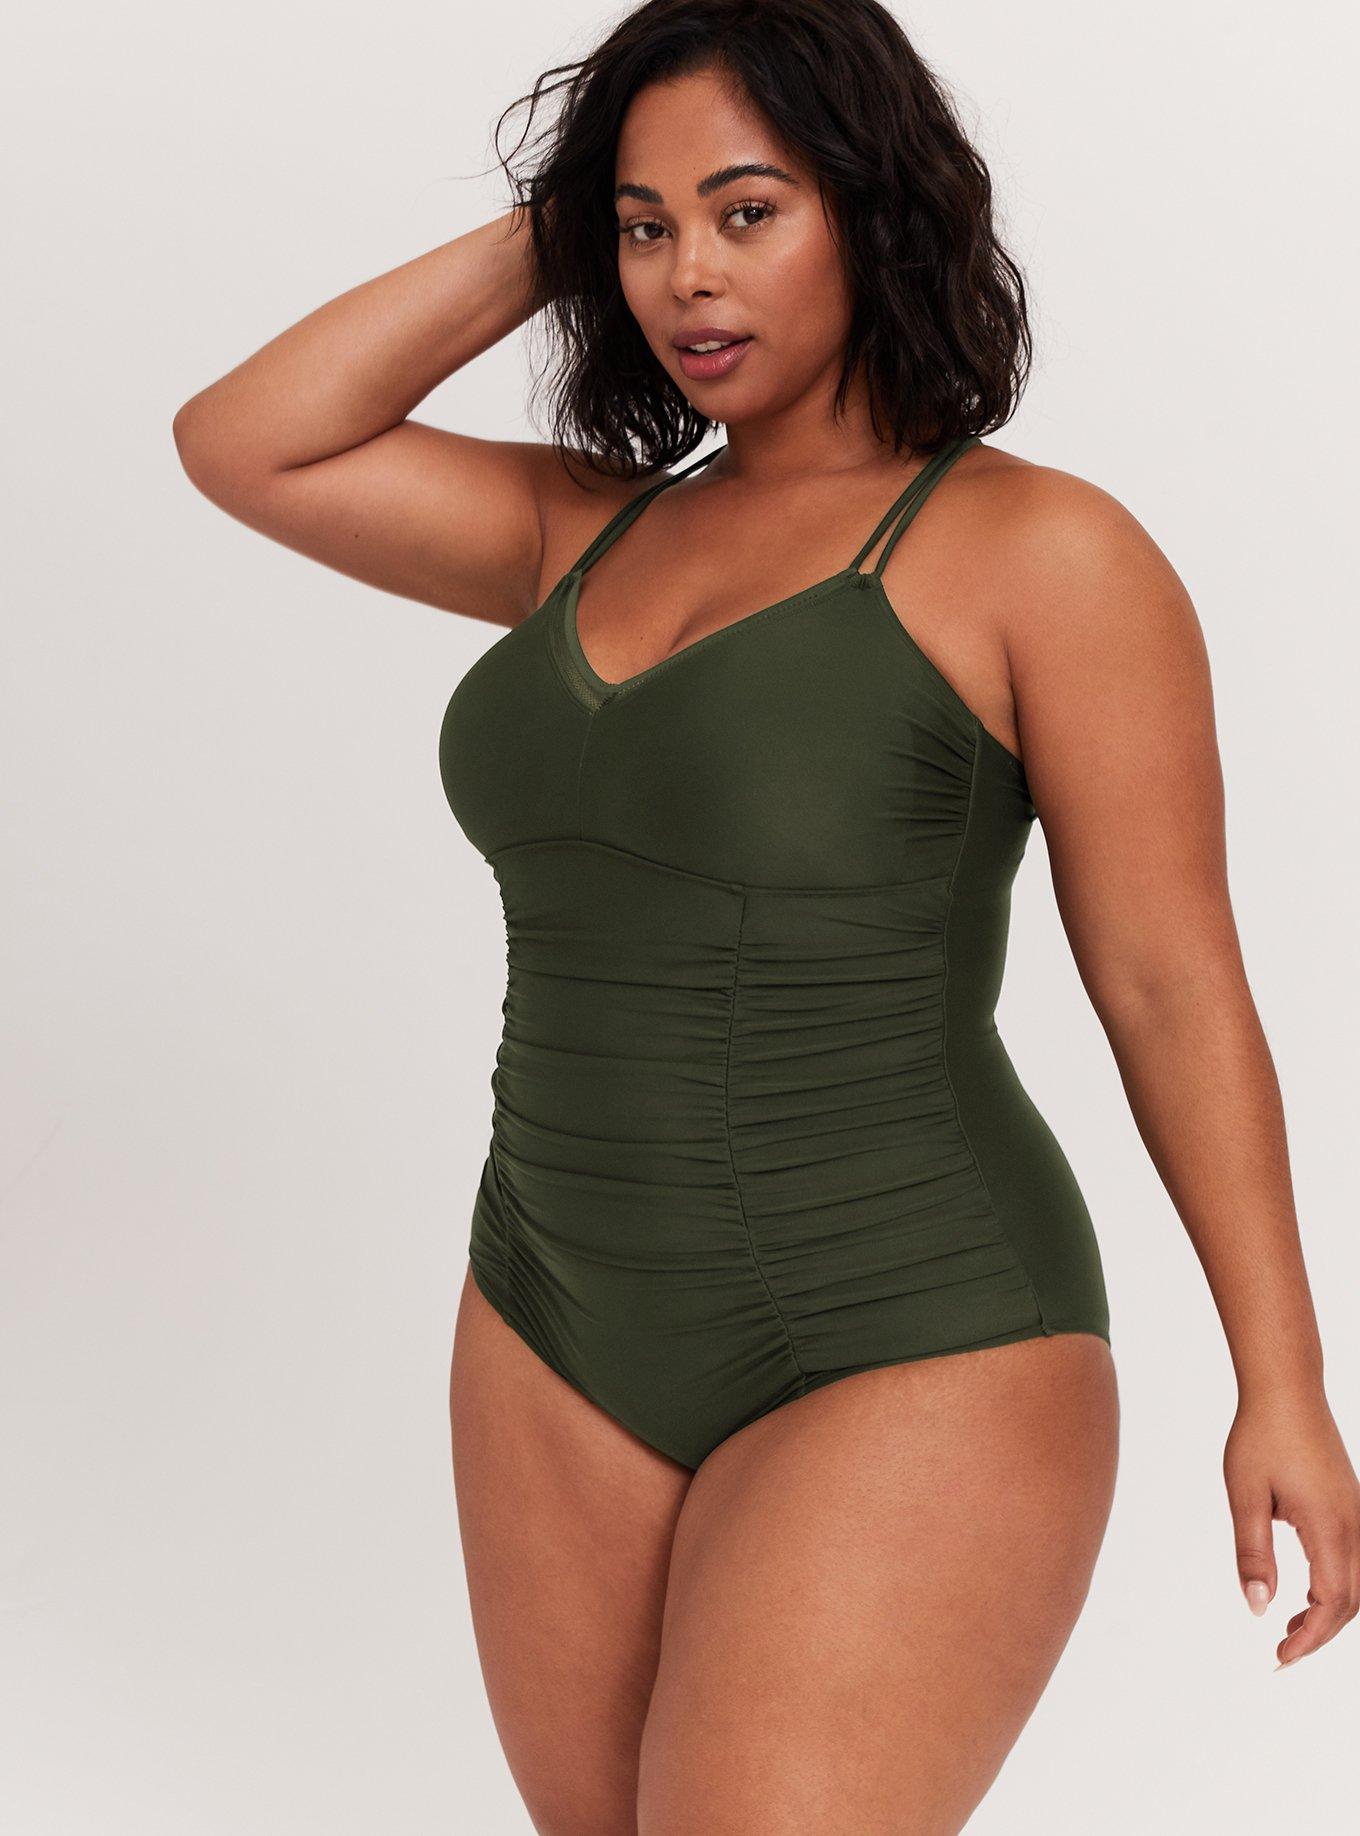 Plus Size - Olive Green Wireless Ruched One-Piece Swimsuit - Torrid